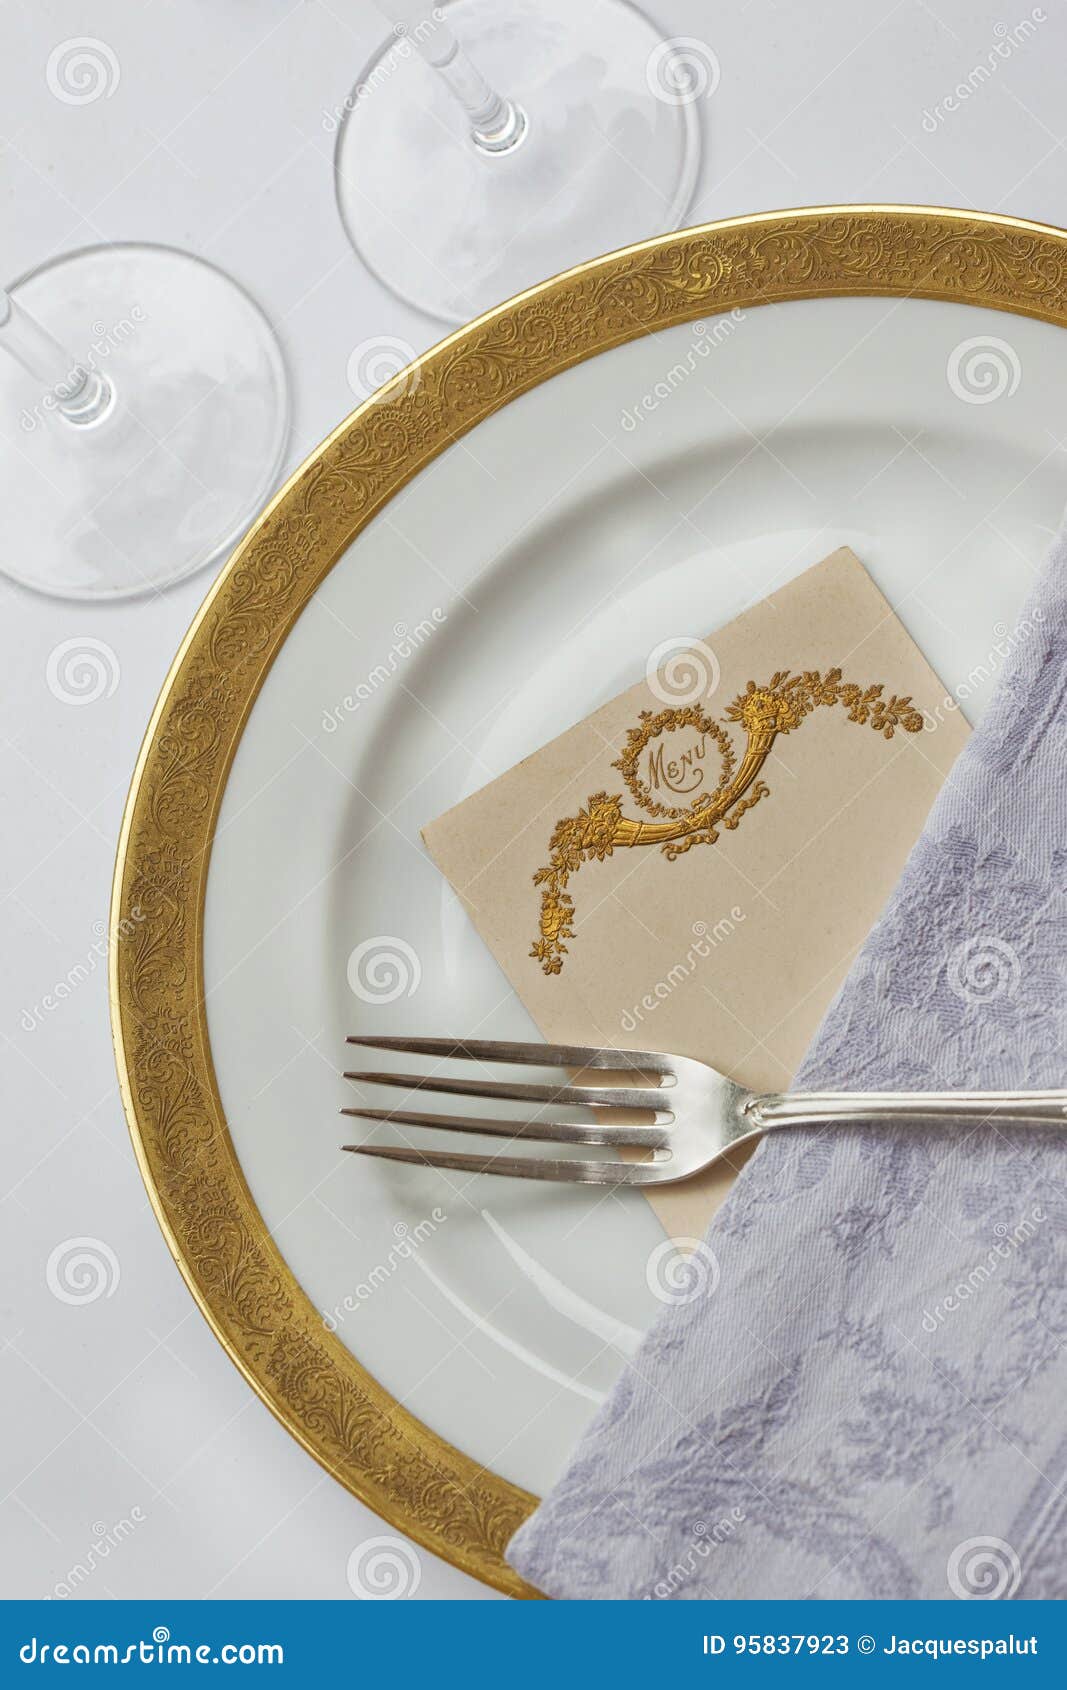 Menu in a restaurant stock image. Image of fork, plate - 95837923